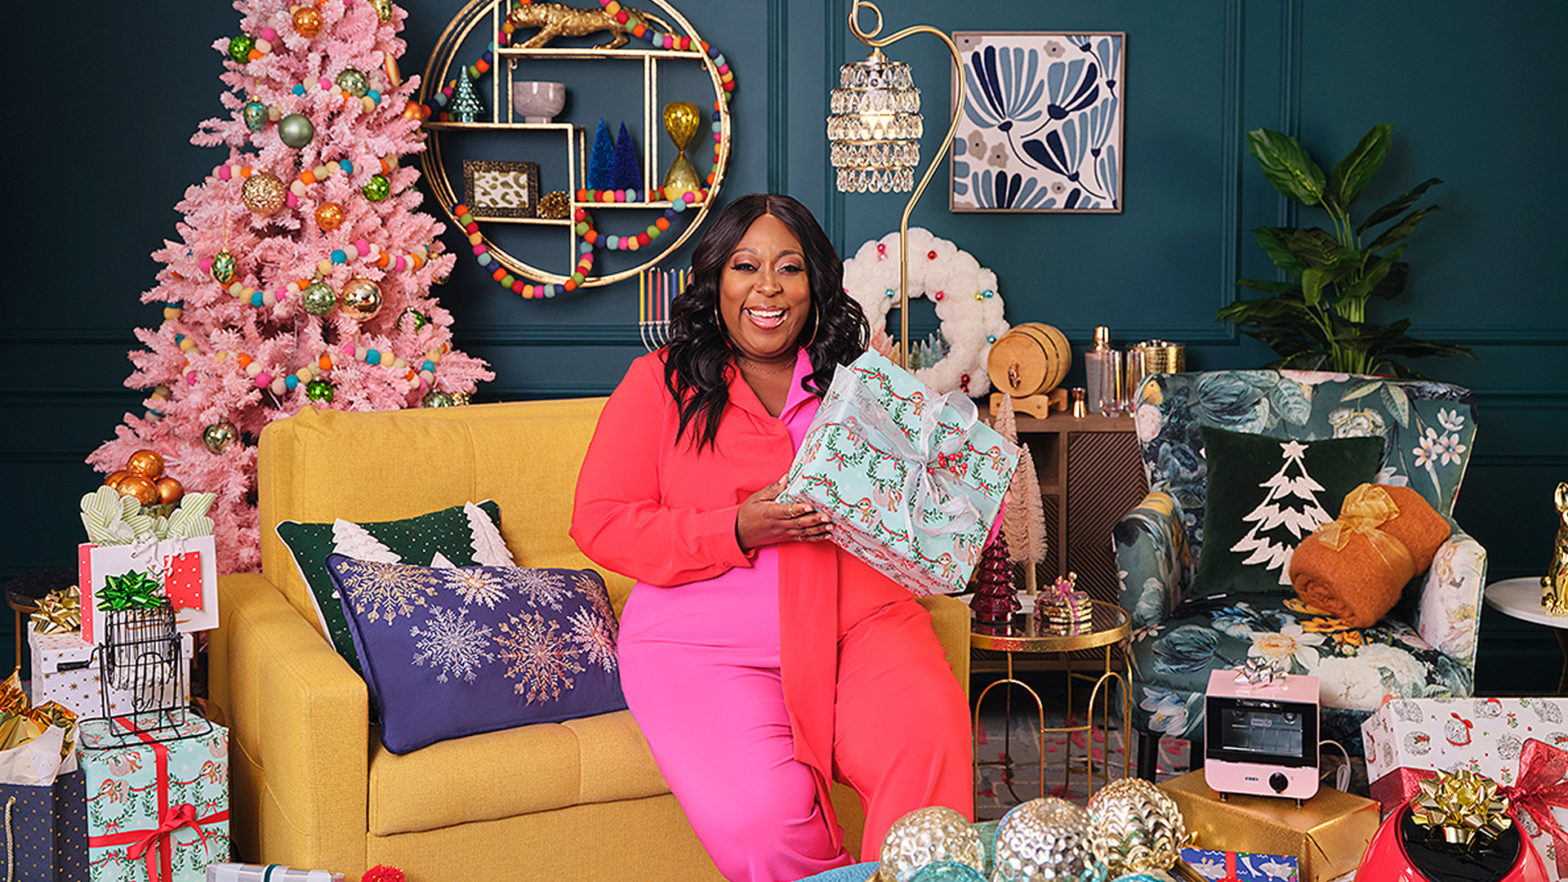 Exclusive: Emmy-Winning Host Loni Love Partners With HomeGoods To Help You 'Gift Better' This Season